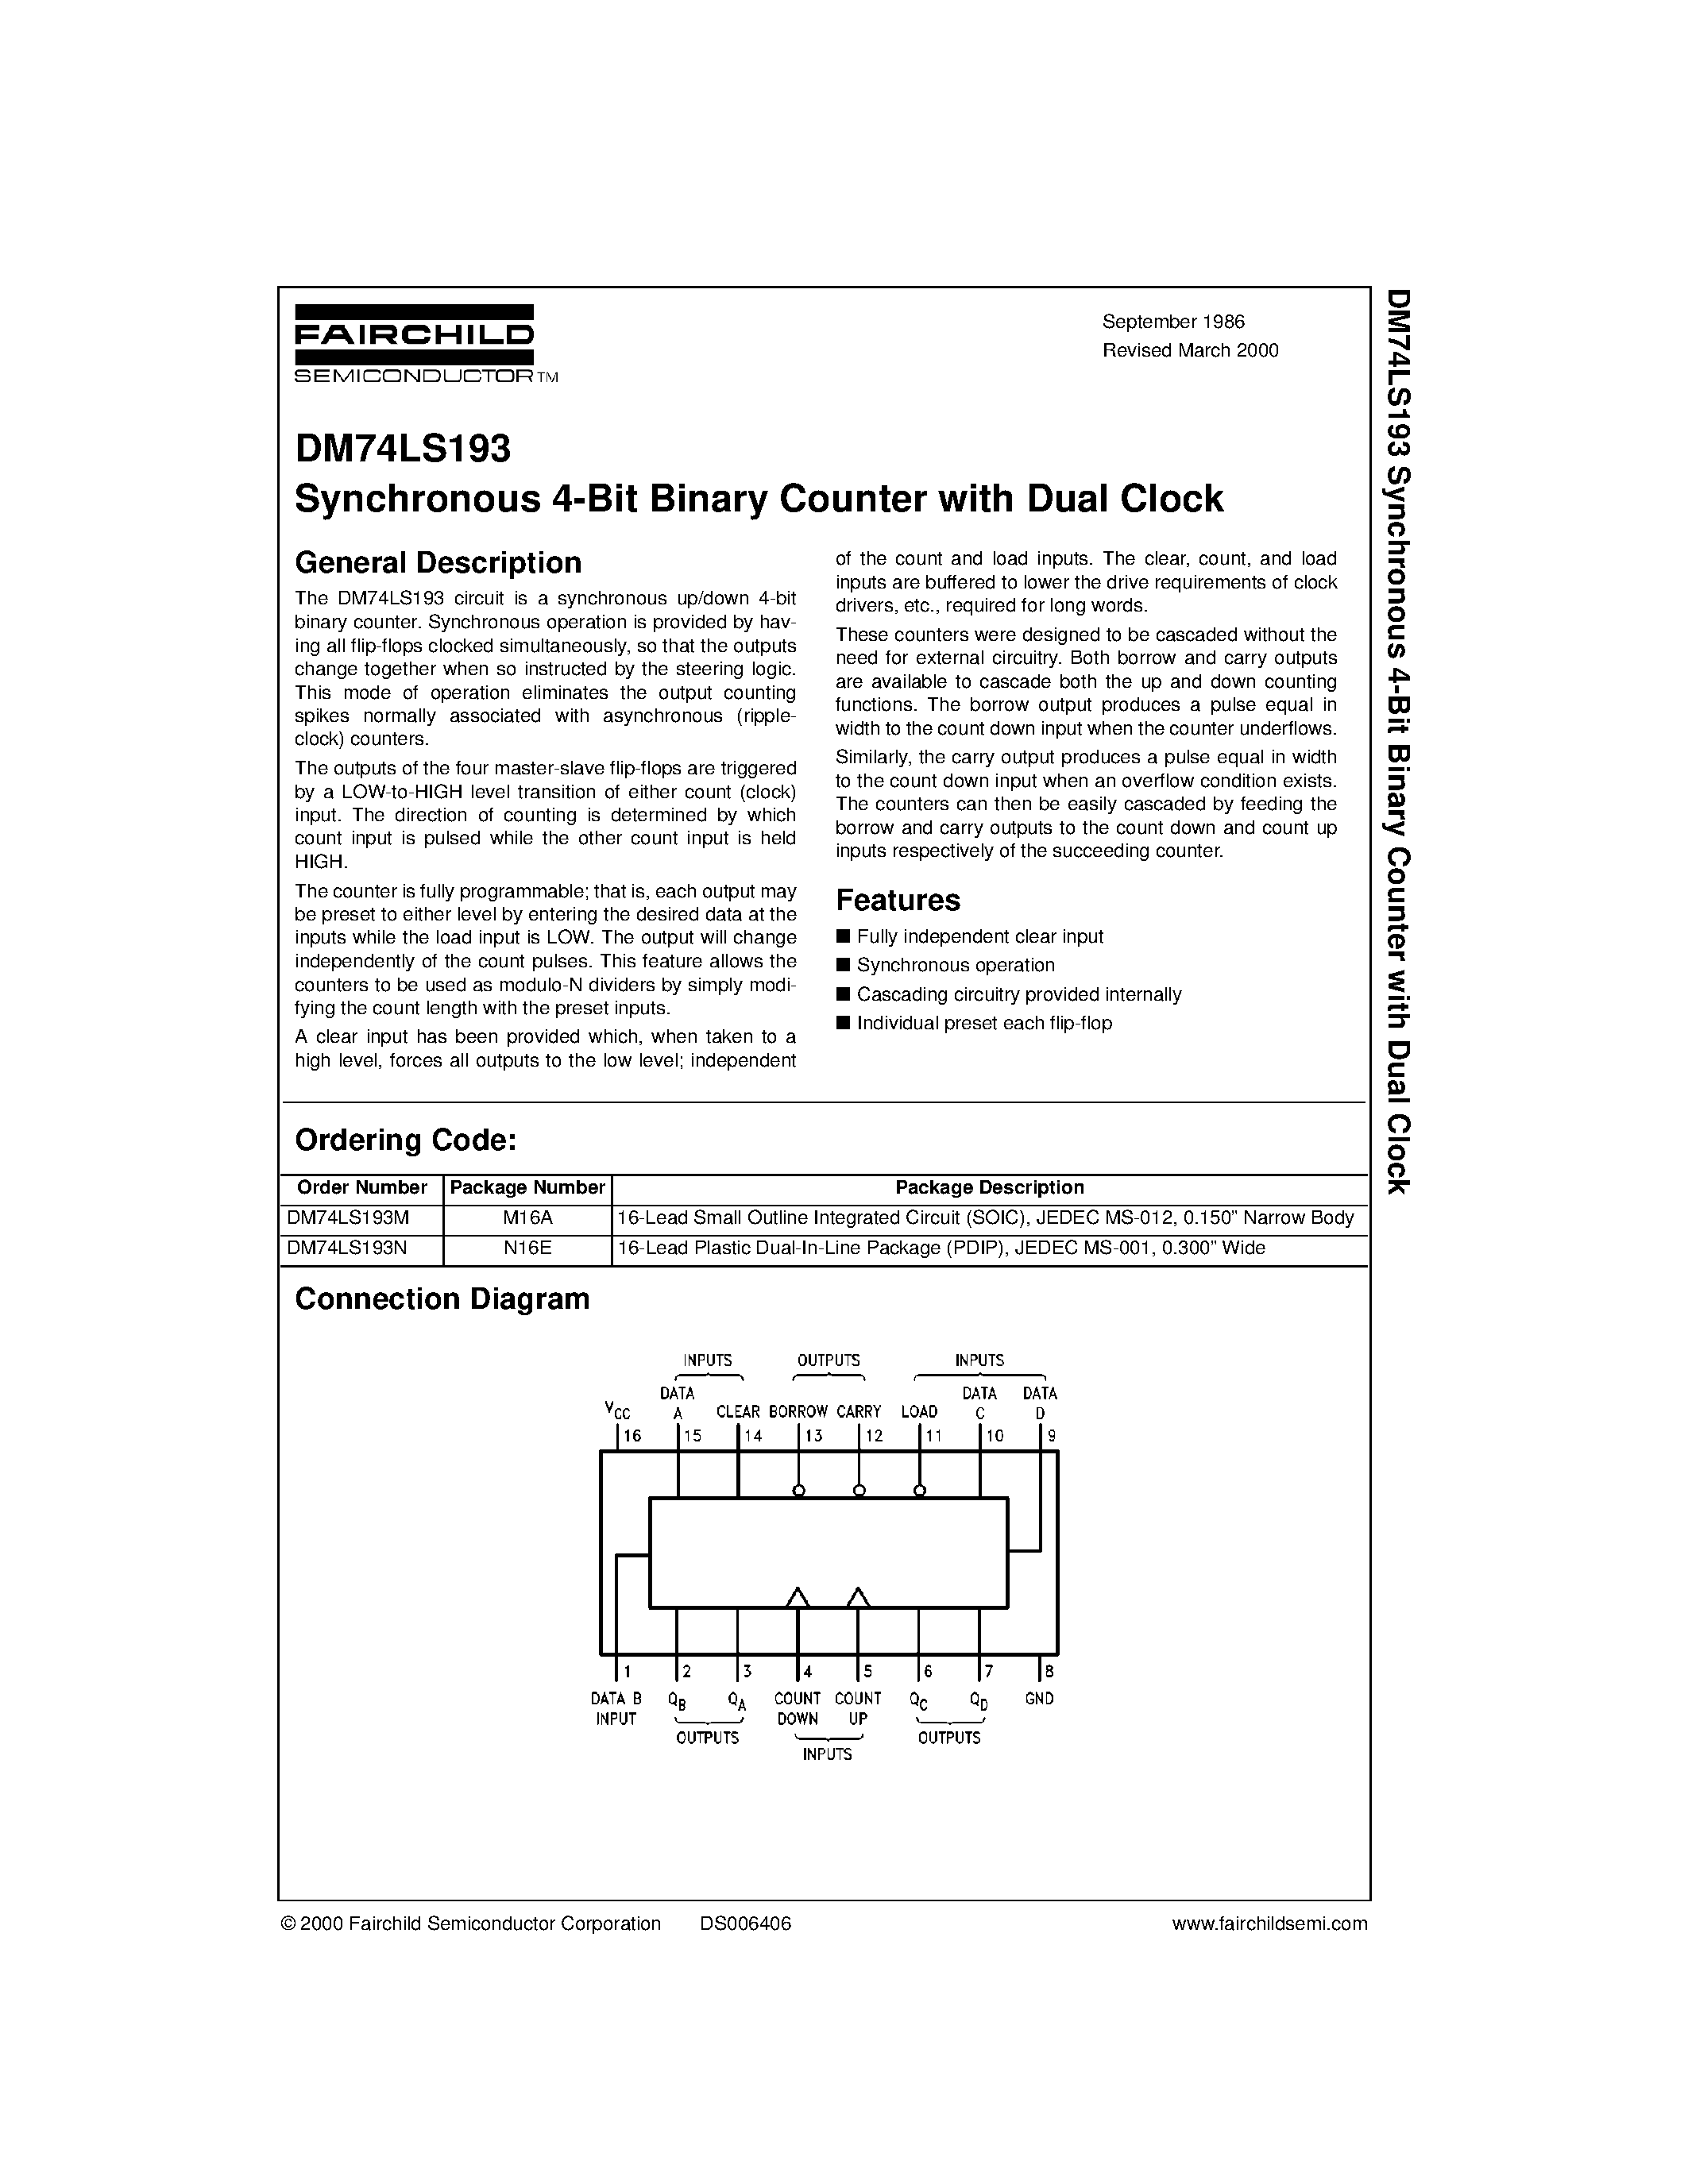 Datasheet 74193 - Synchronous 4-Bit Binary Counter with Dual Clock page 1